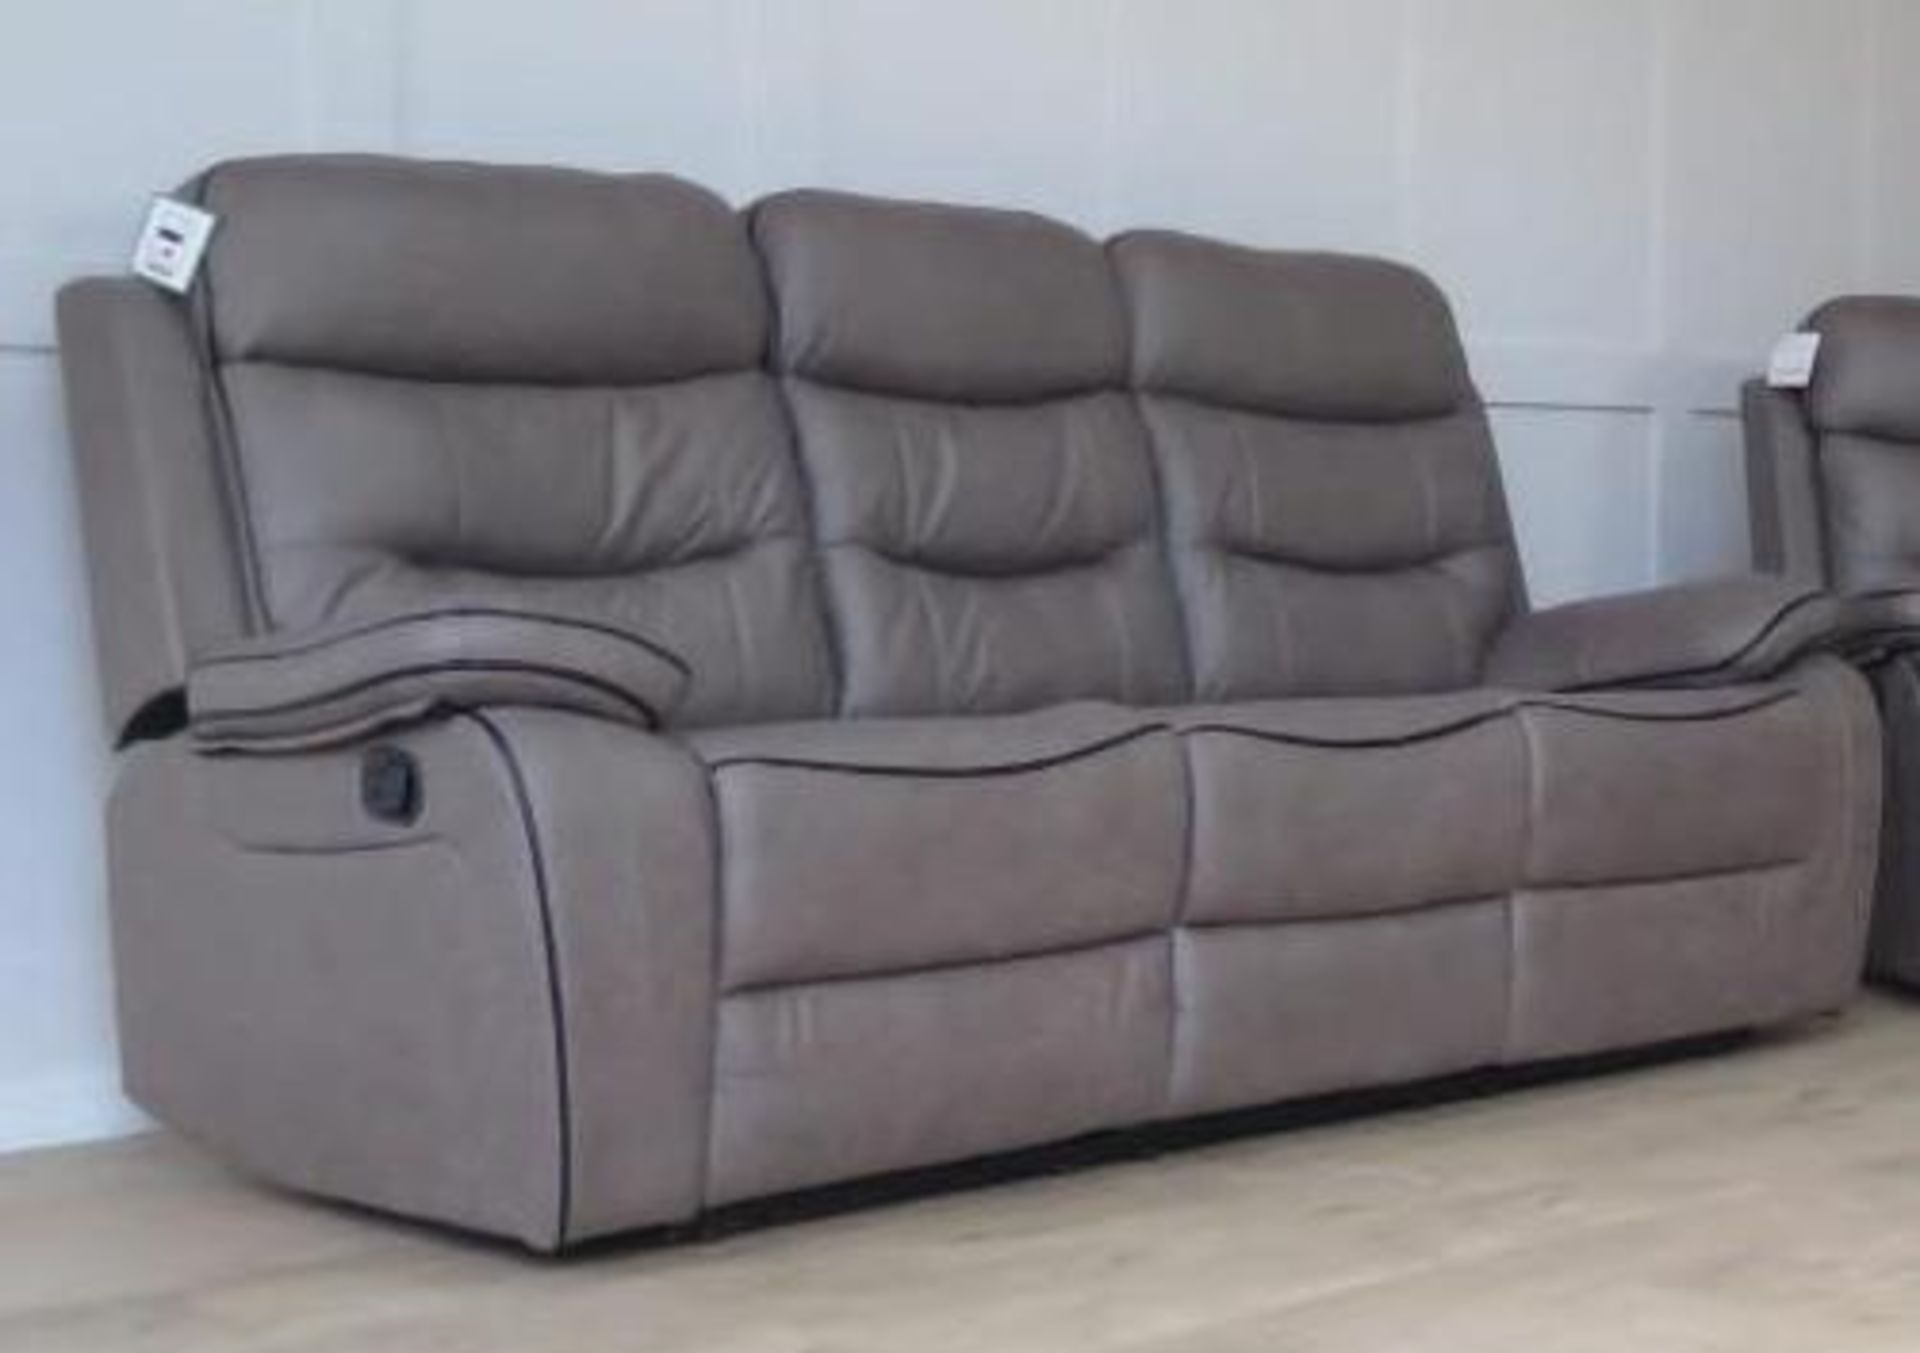 BRAND NEW & BOXED Llanharan 3 + 2 seater manual reclining suite in Grey fabric